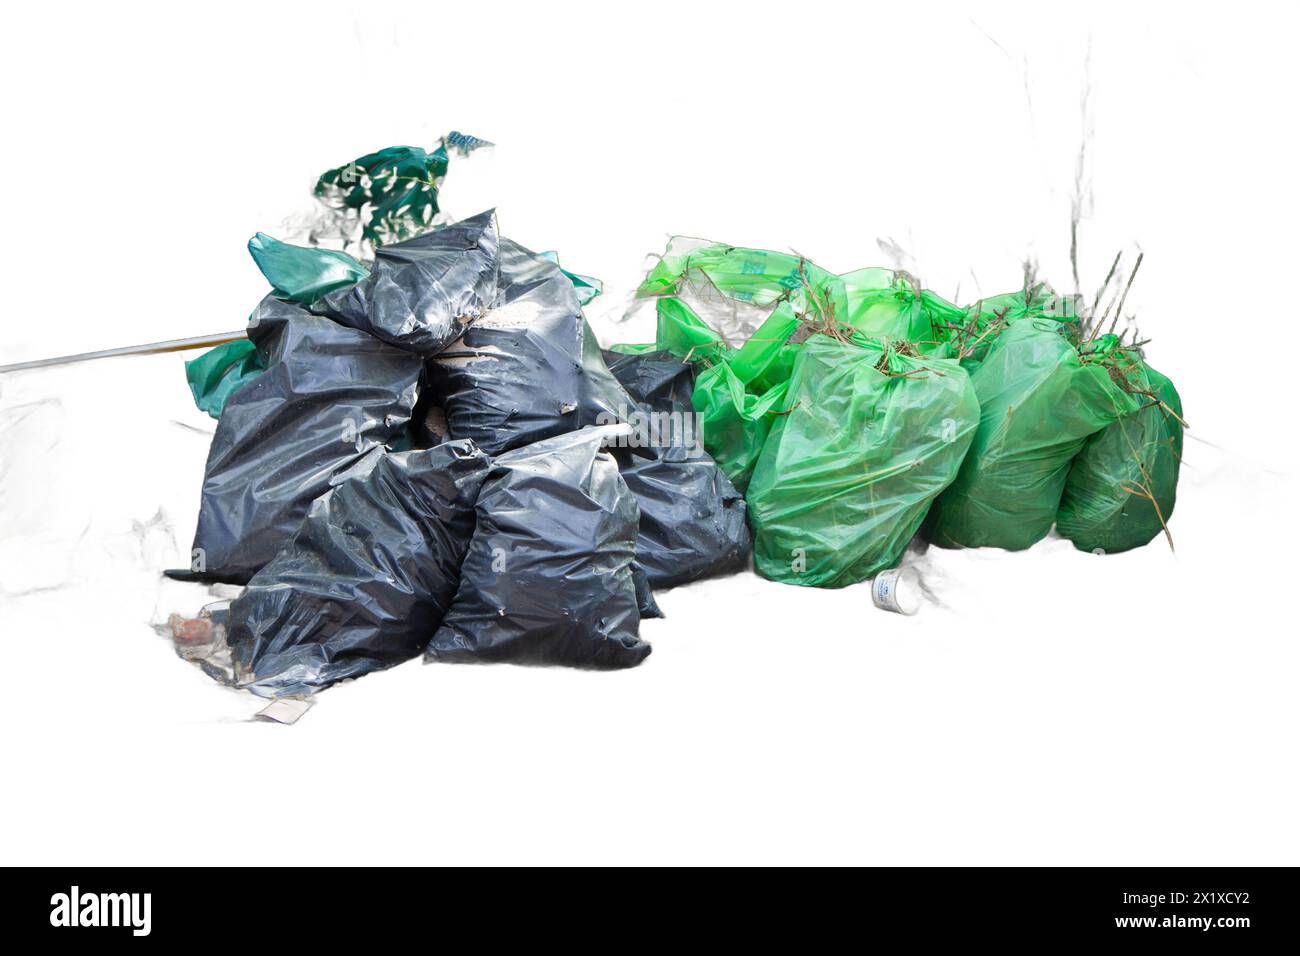 Isolated piles of trash bags in green and black colors. Perfect for waste management, sanitation, and environmental graphics Stock Photo